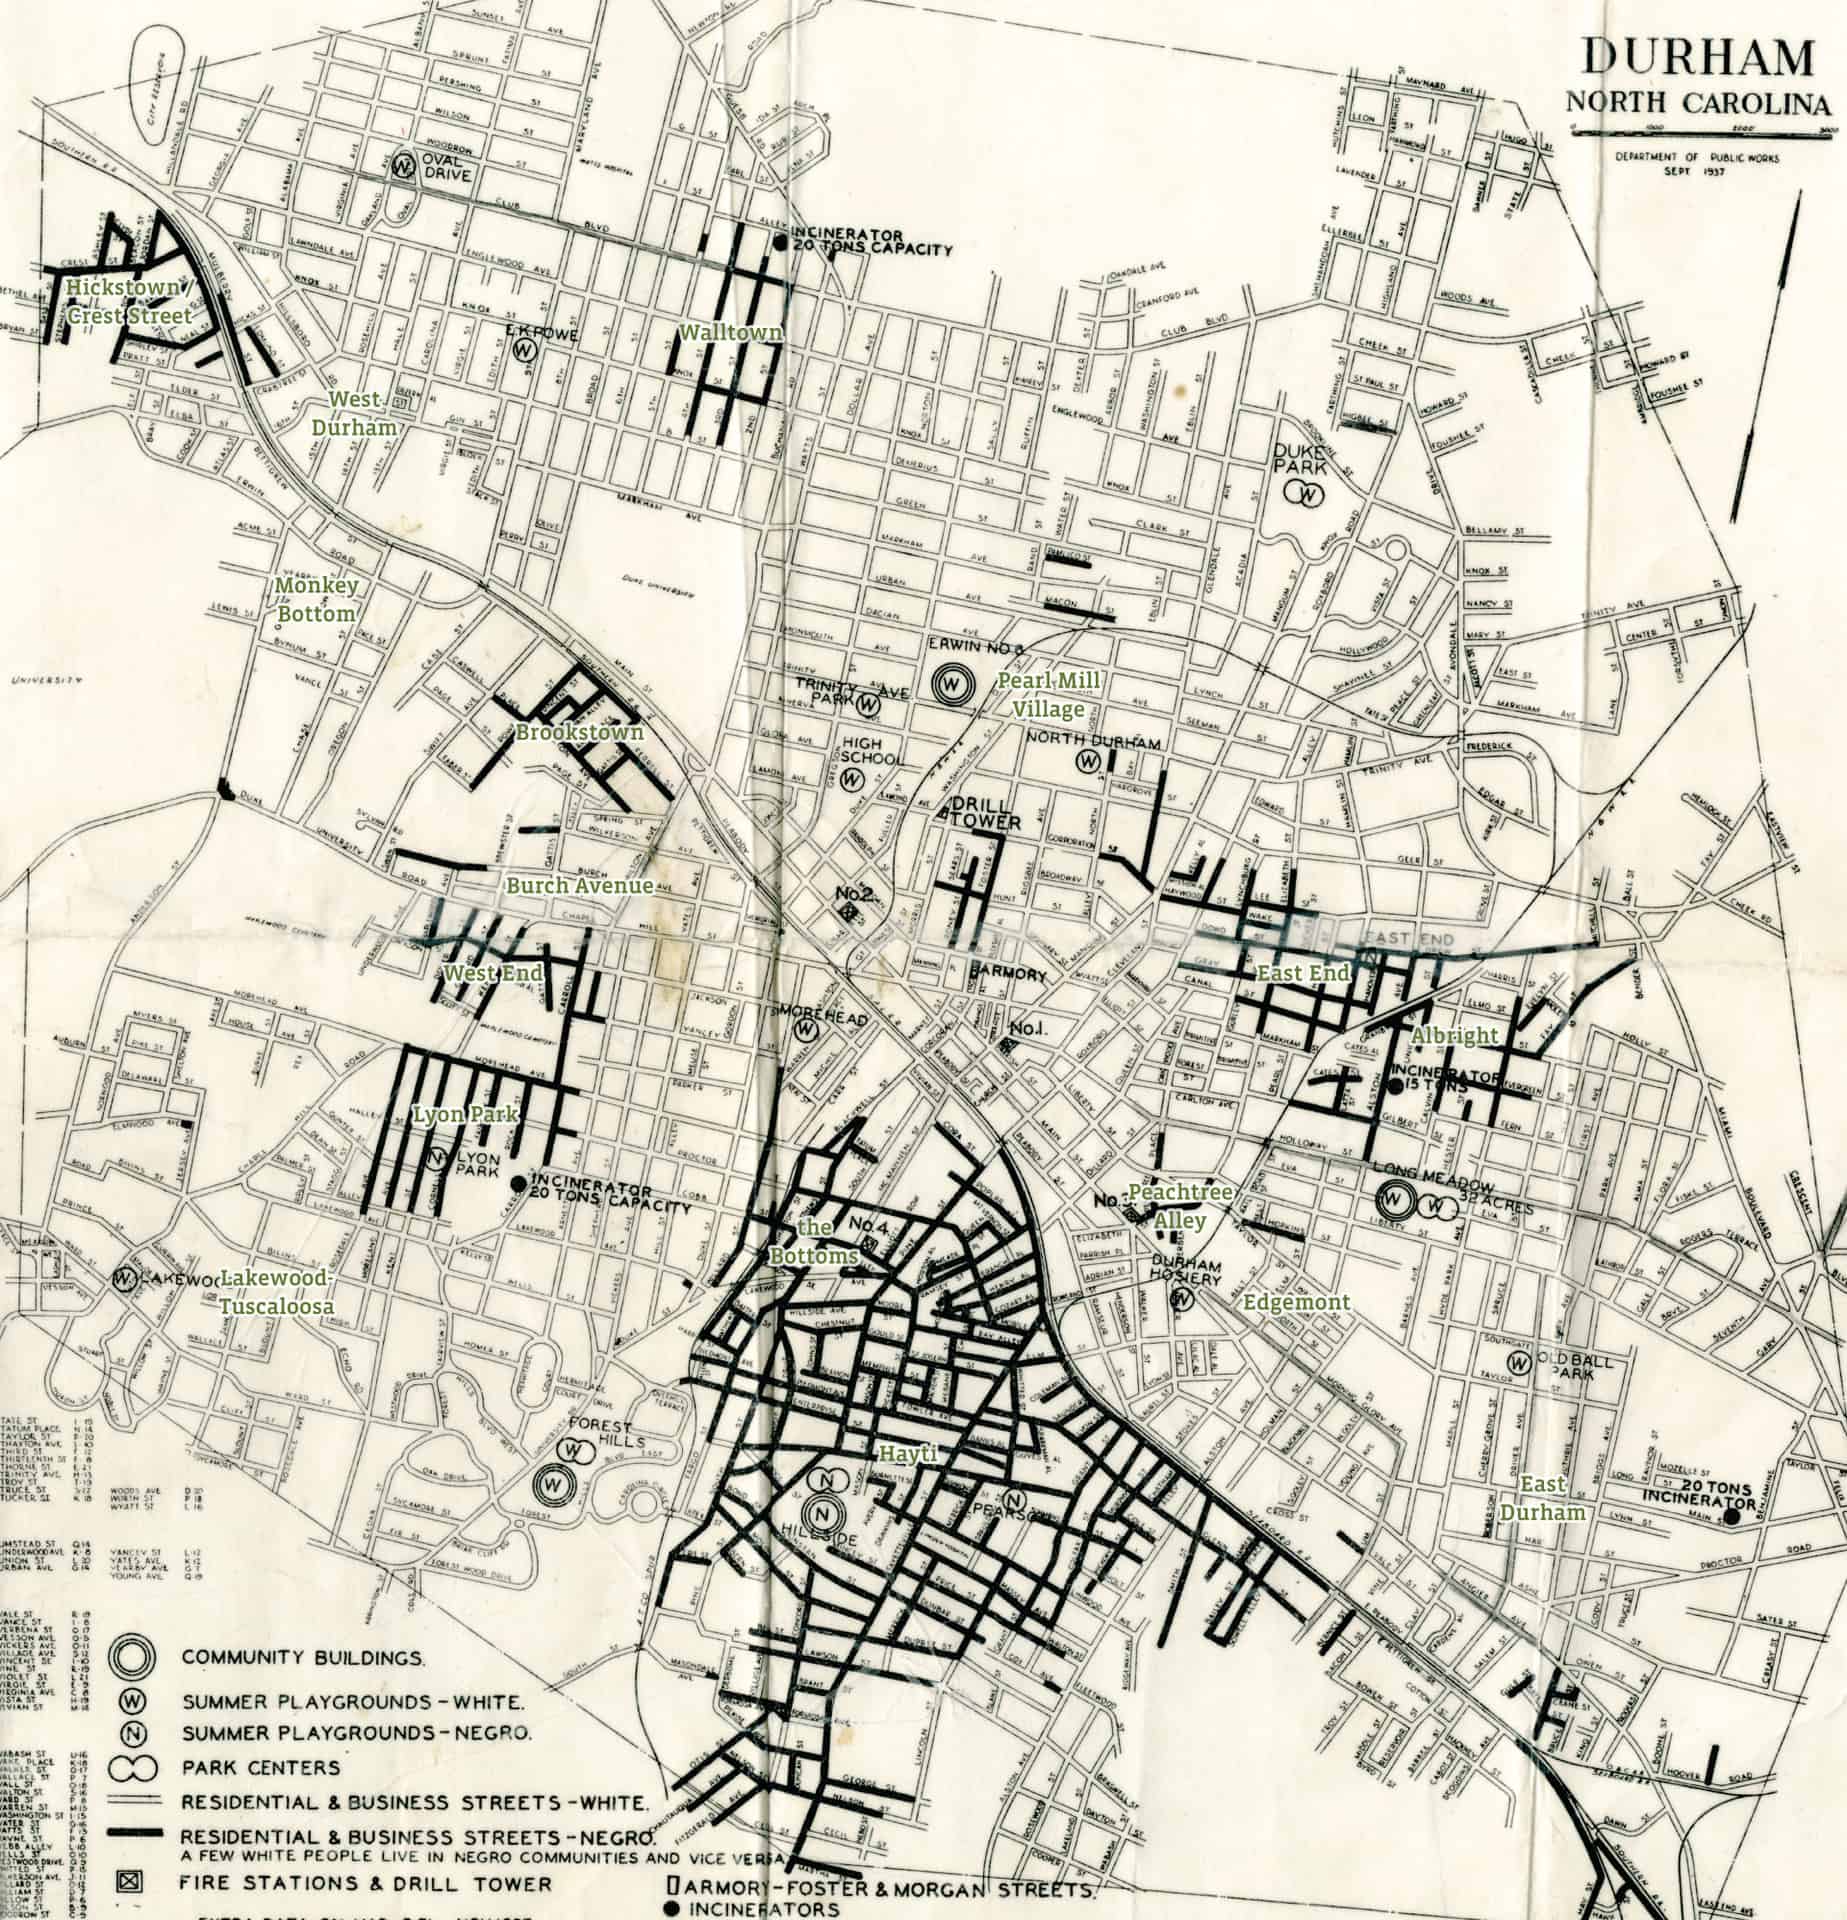 Copy of a 1930s era city planning map of Durham on which city officials have highlighted blocks where Black residents live.